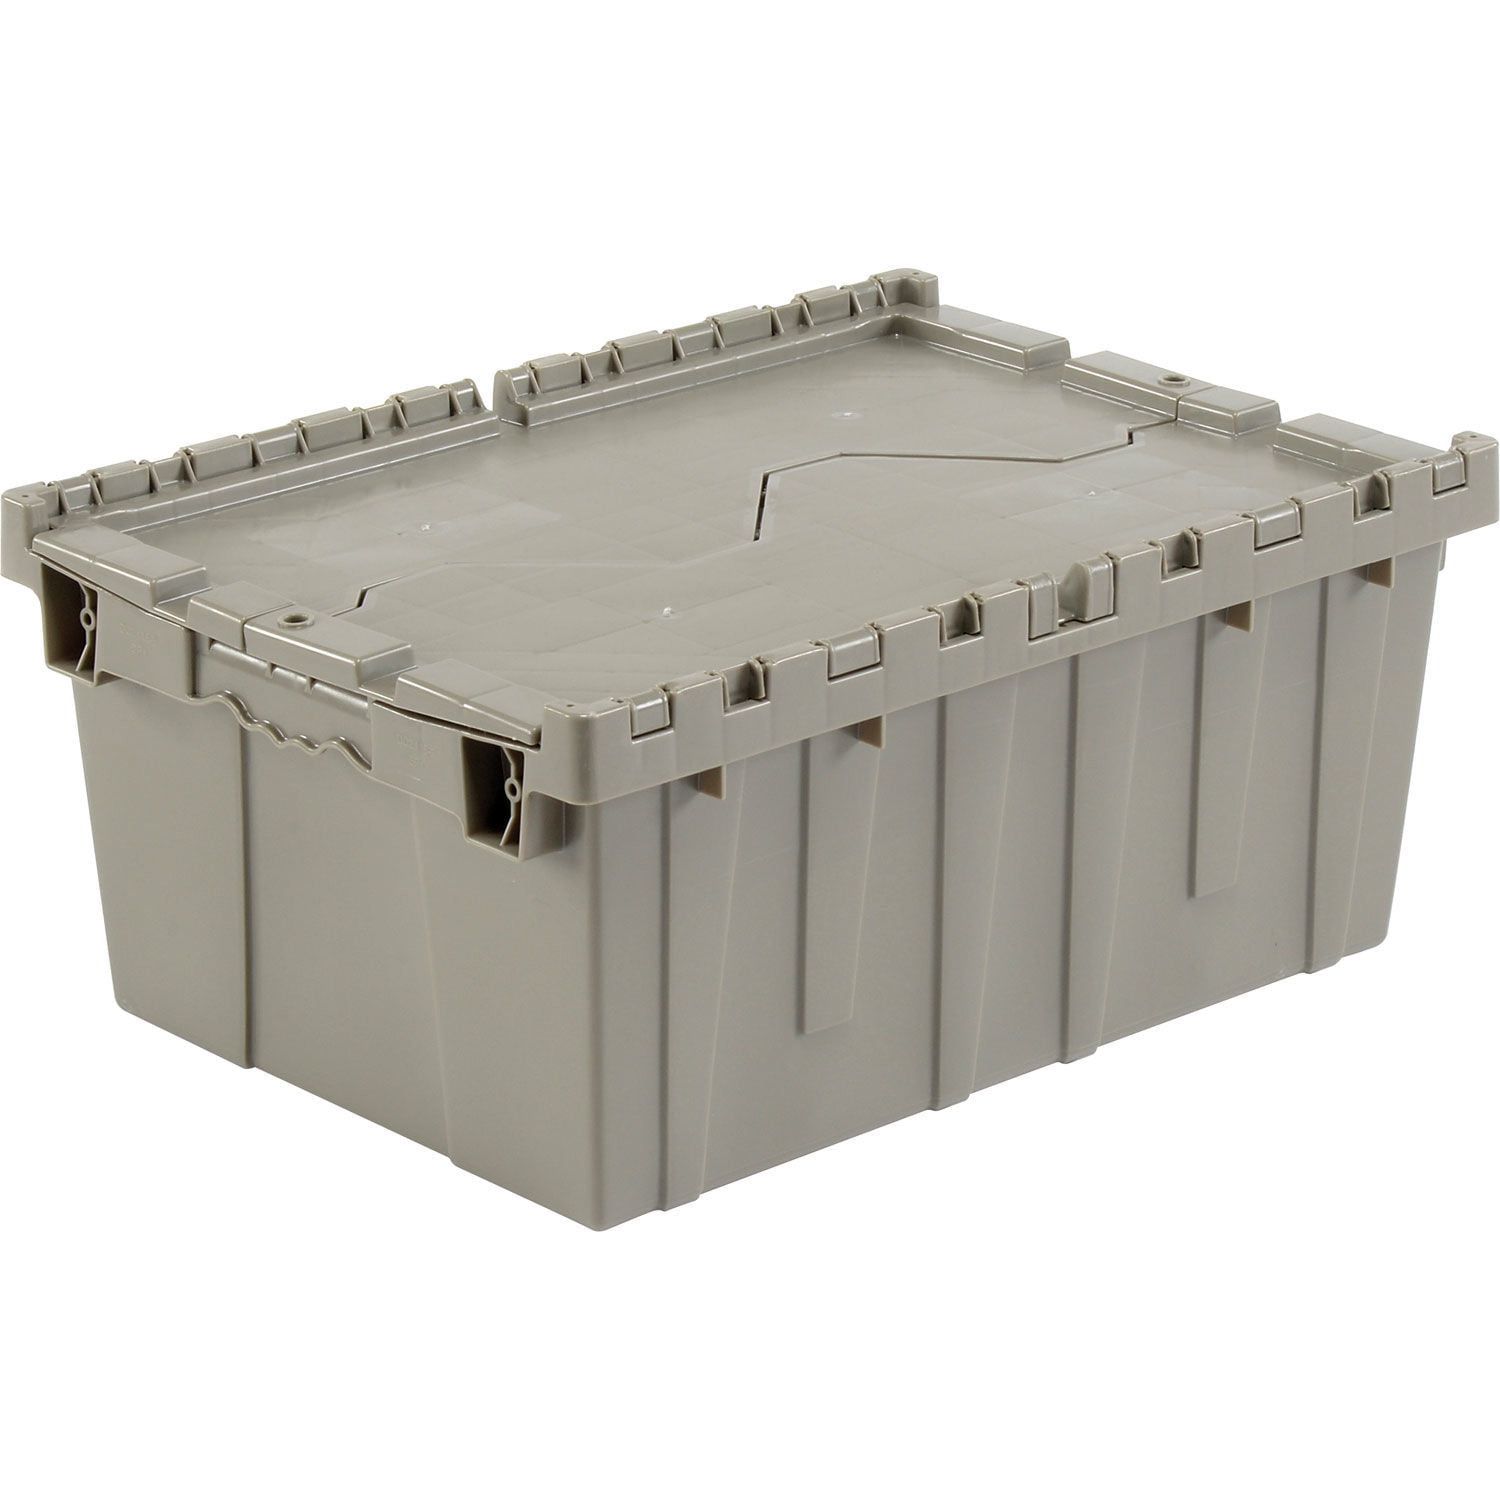 Distribution Container DC2115-17 With Hinged Lid 21-7/8x15-1/4x17-1/4 Red 